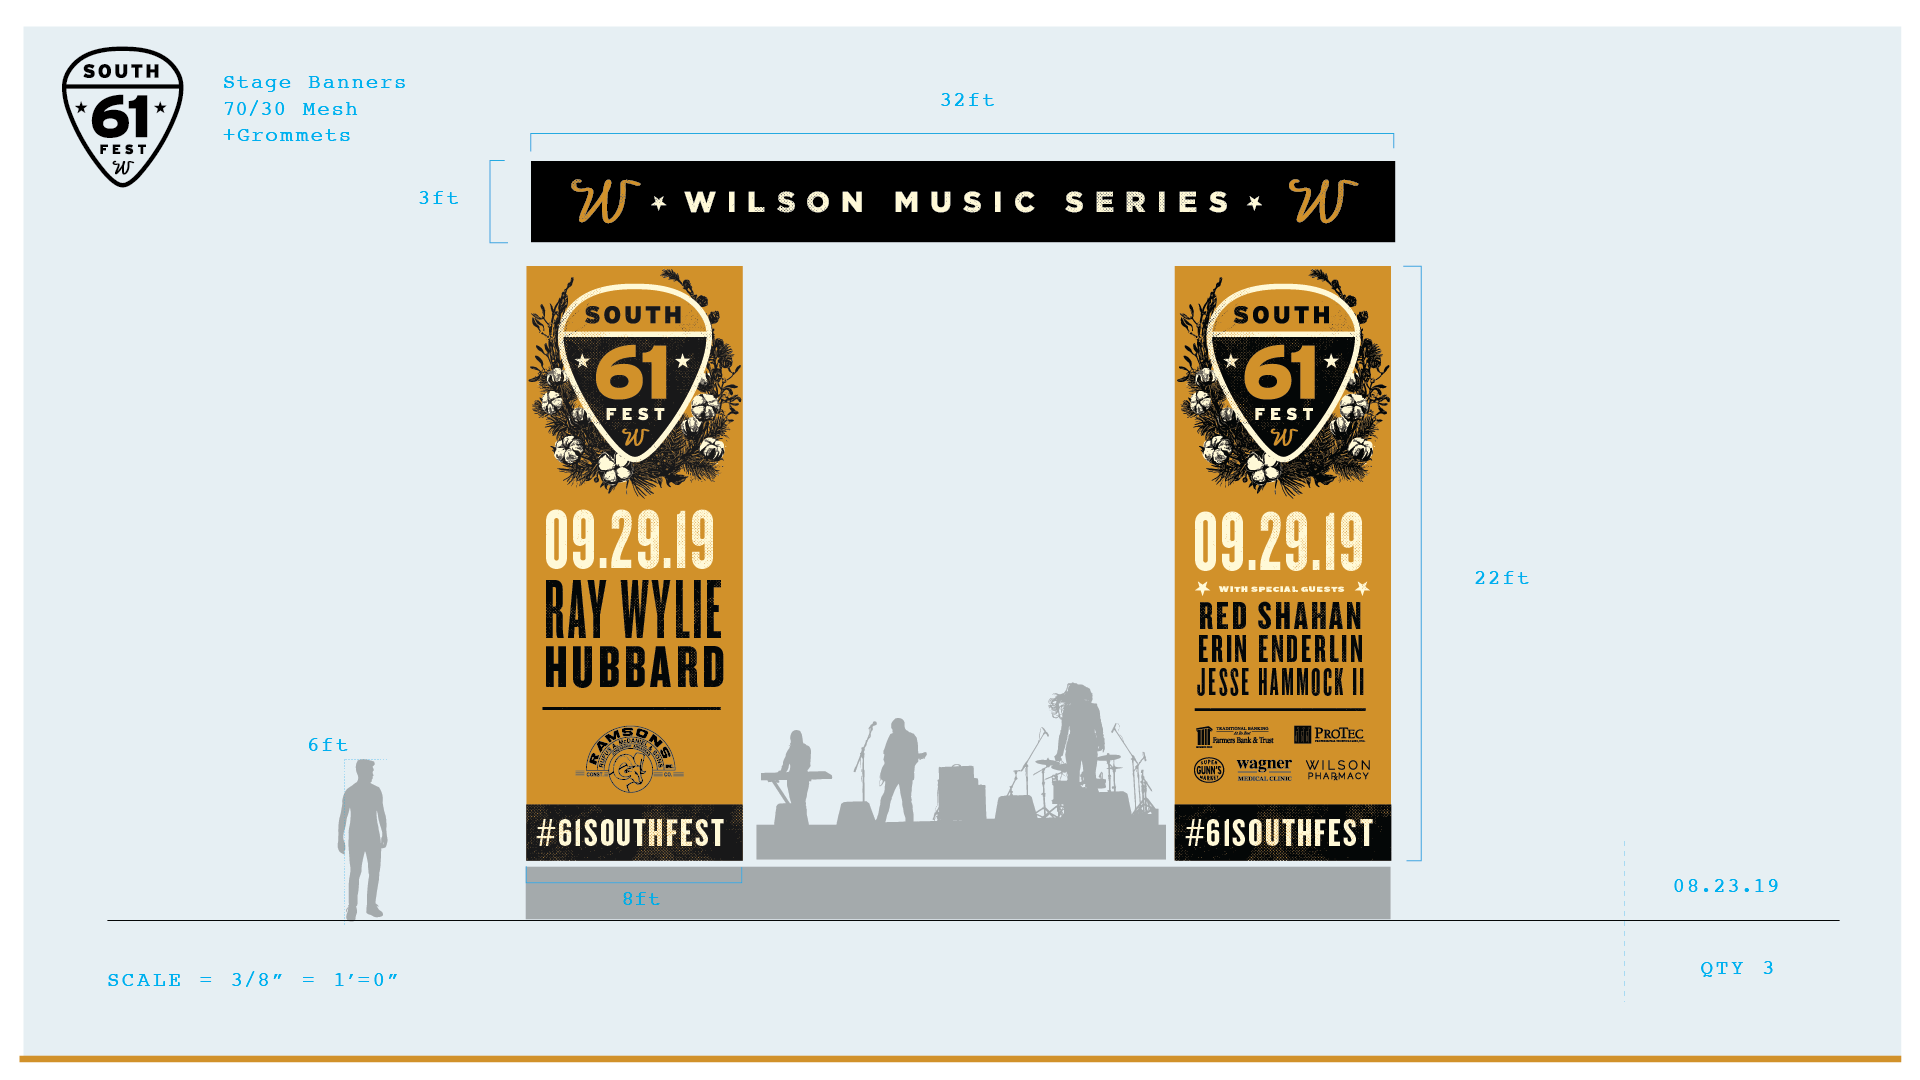 WLSN-61SouthFest-StageBanners-mech.png